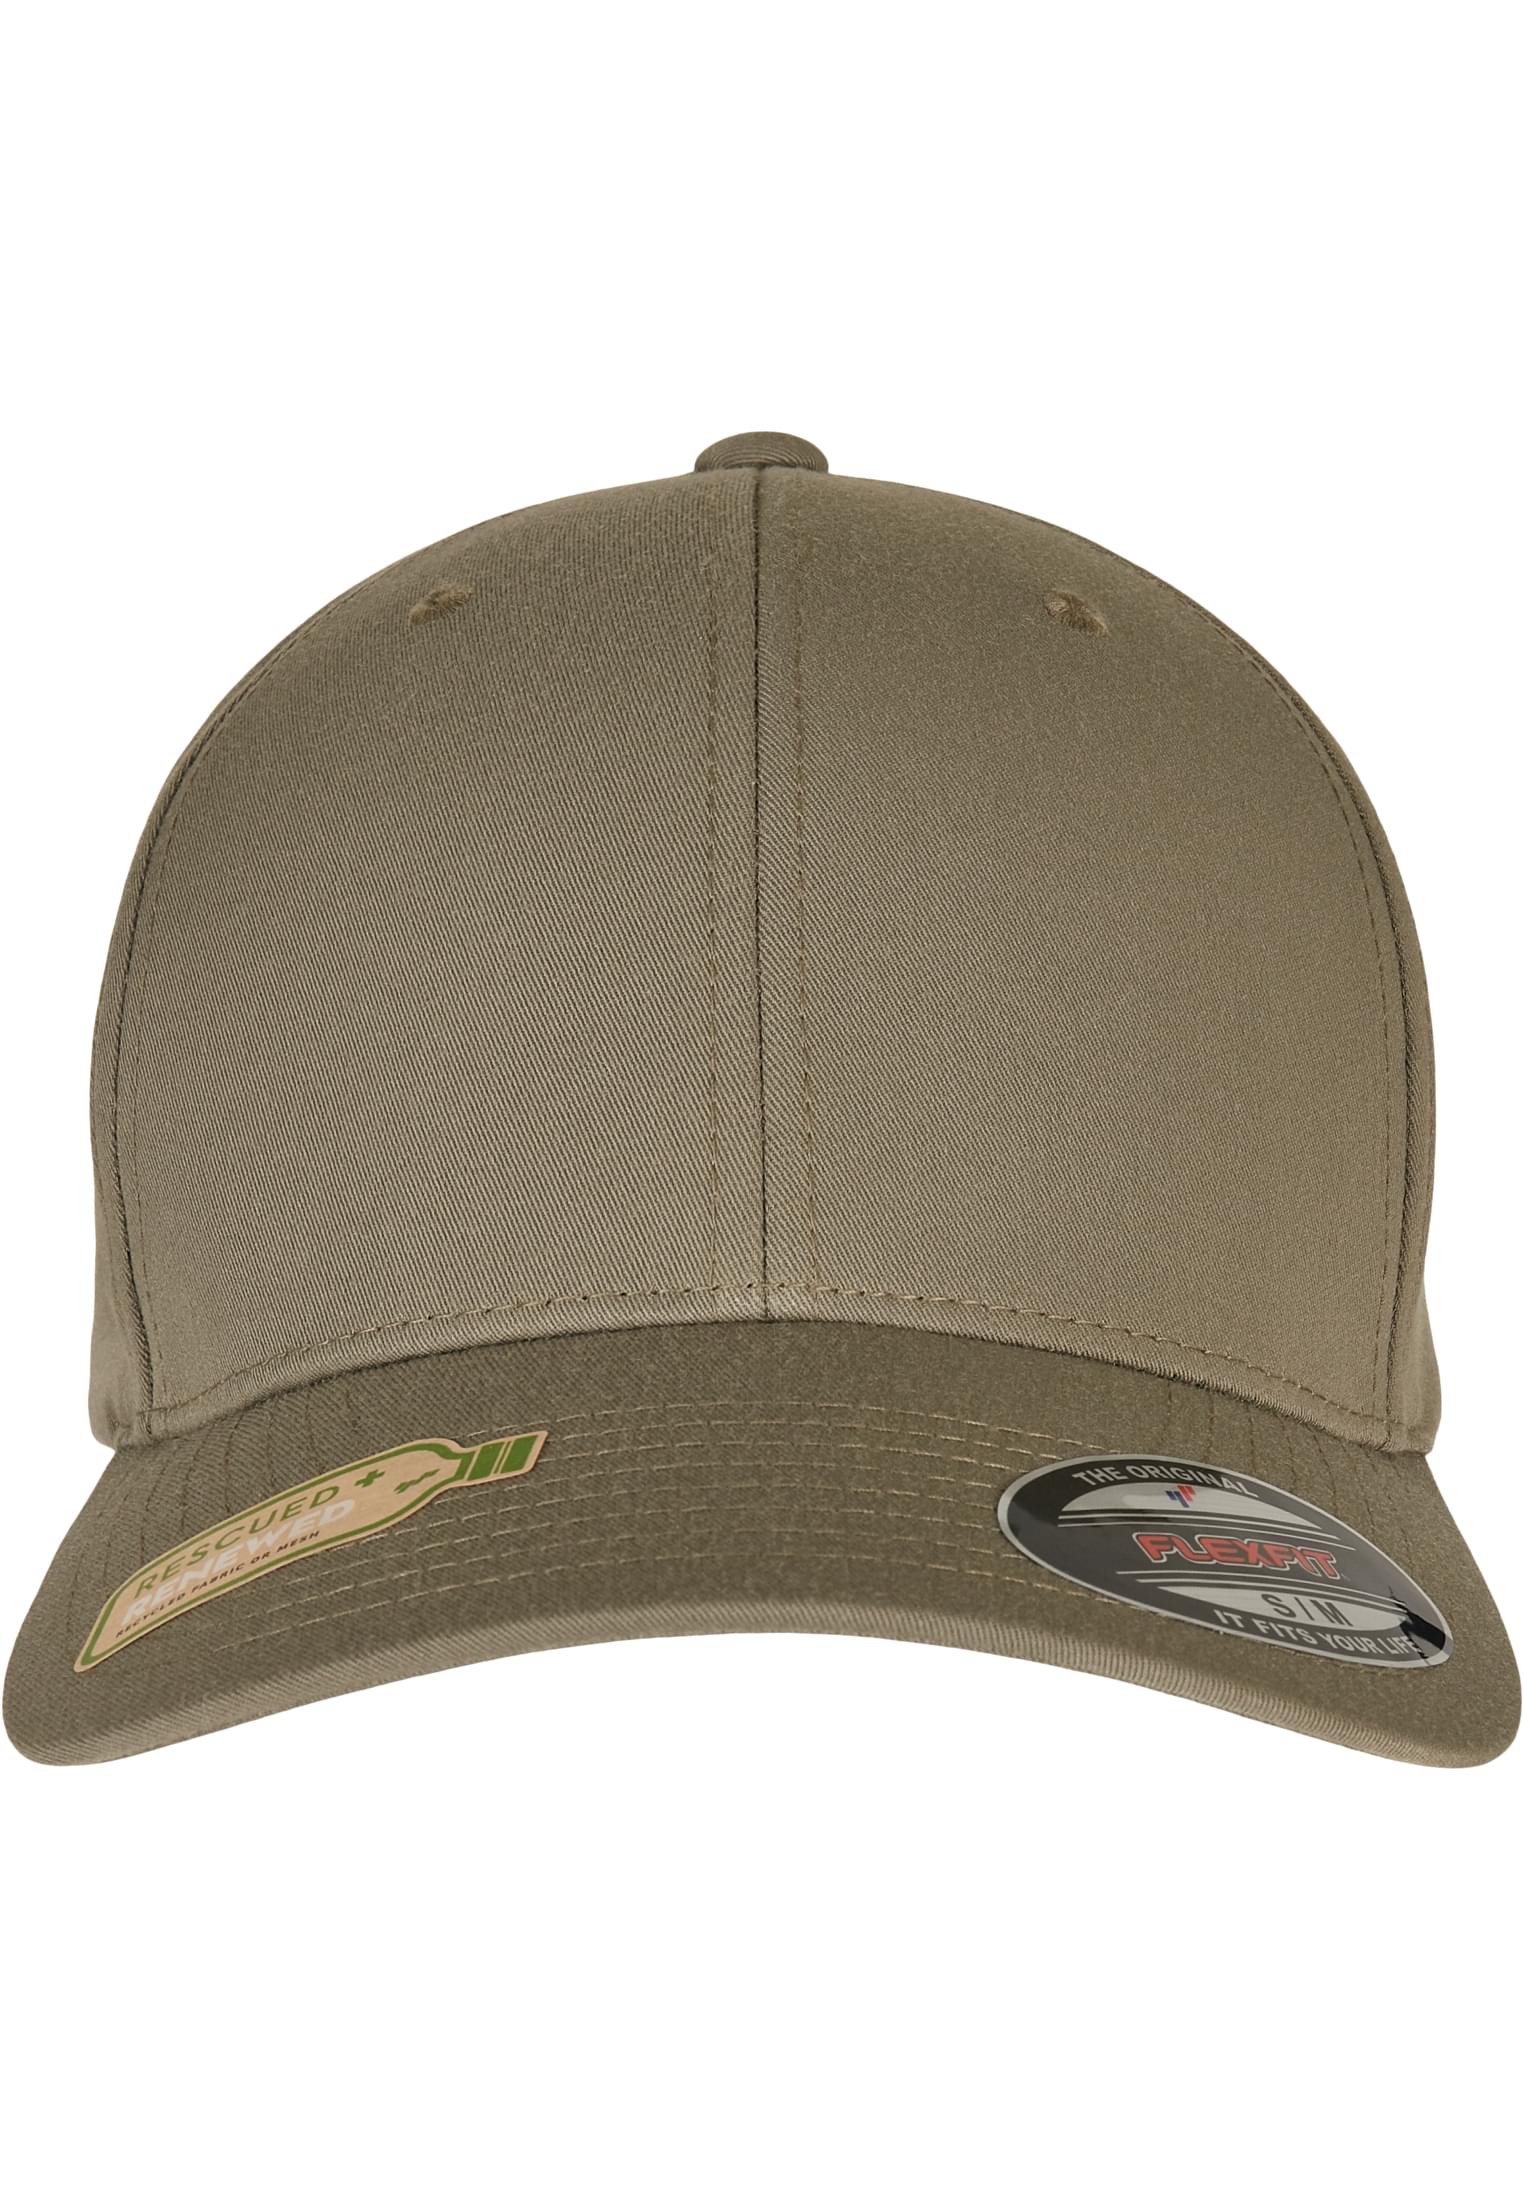 Cap-6277RP Recycled Polyester Flexfit